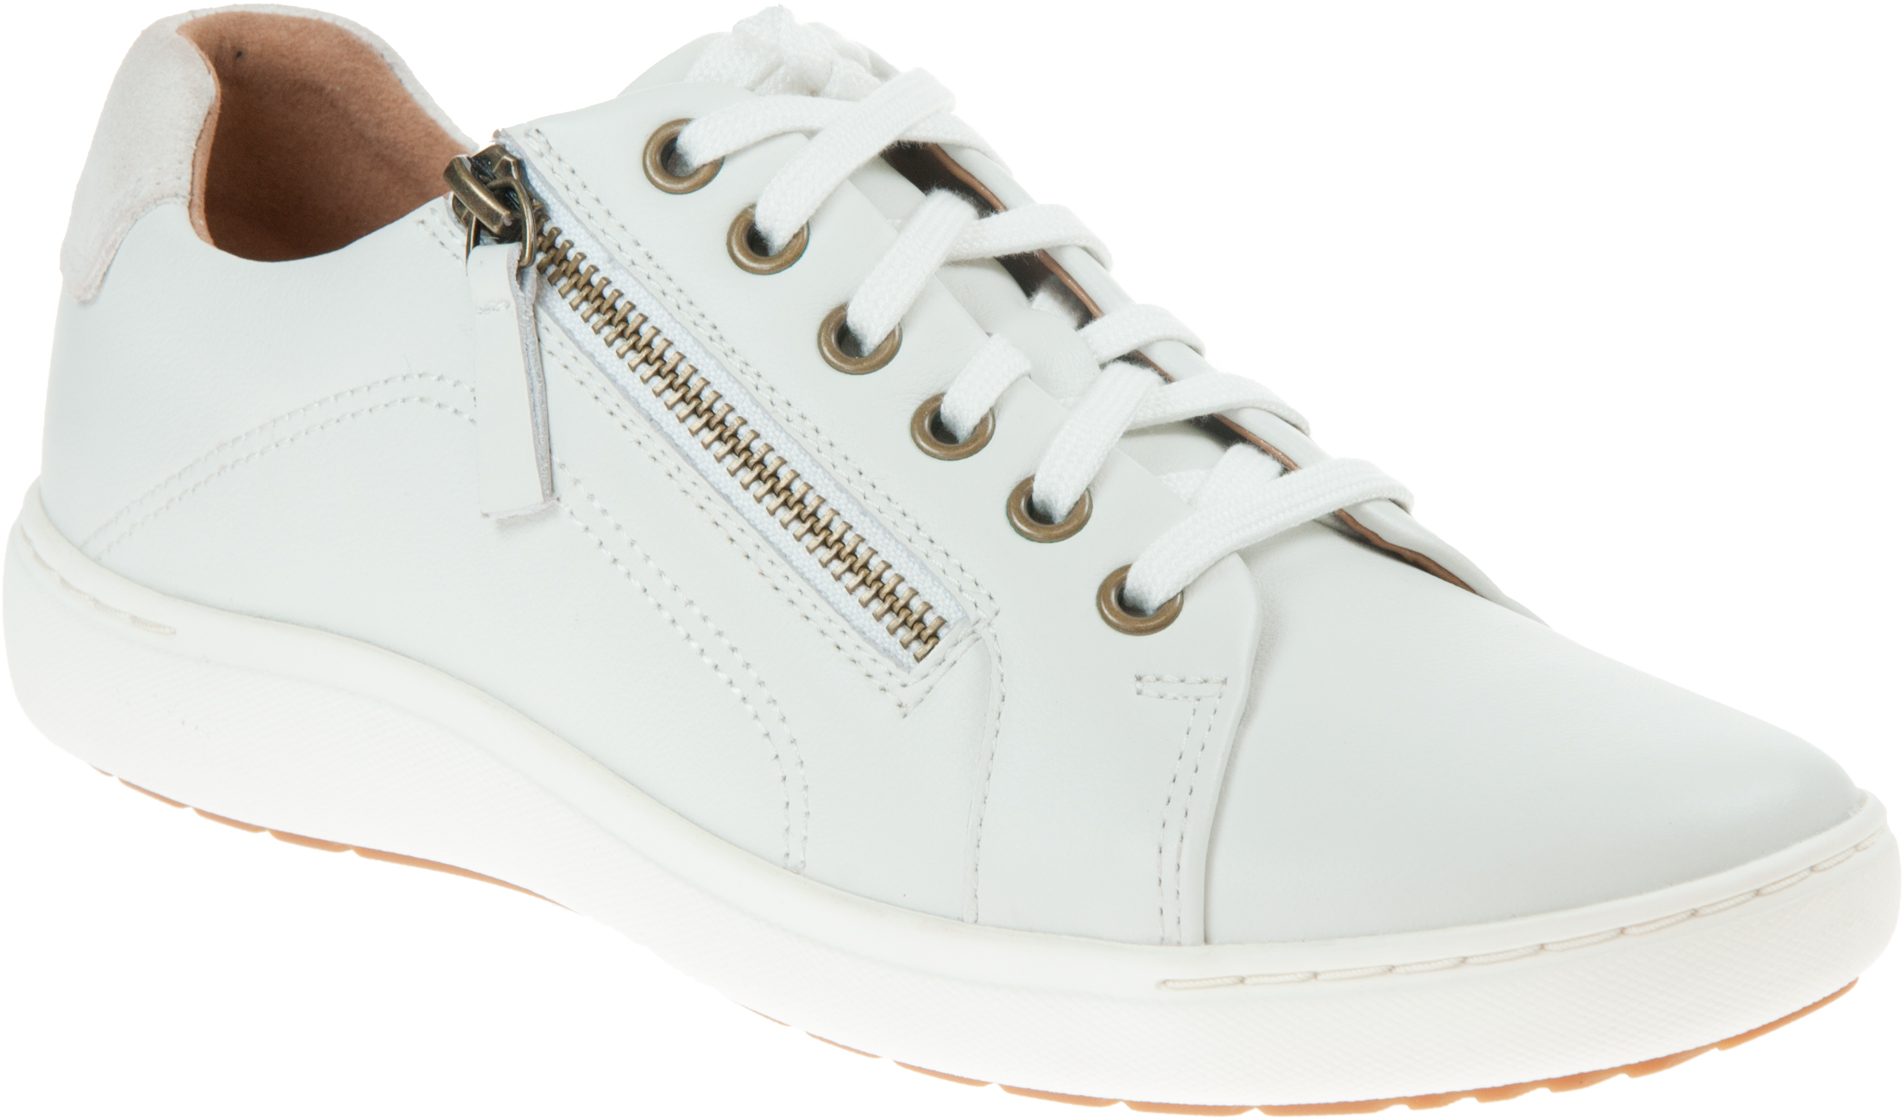 Clarks Nalle Lace White Leather 26165001 - Everyday Shoes - Humphries Shoes